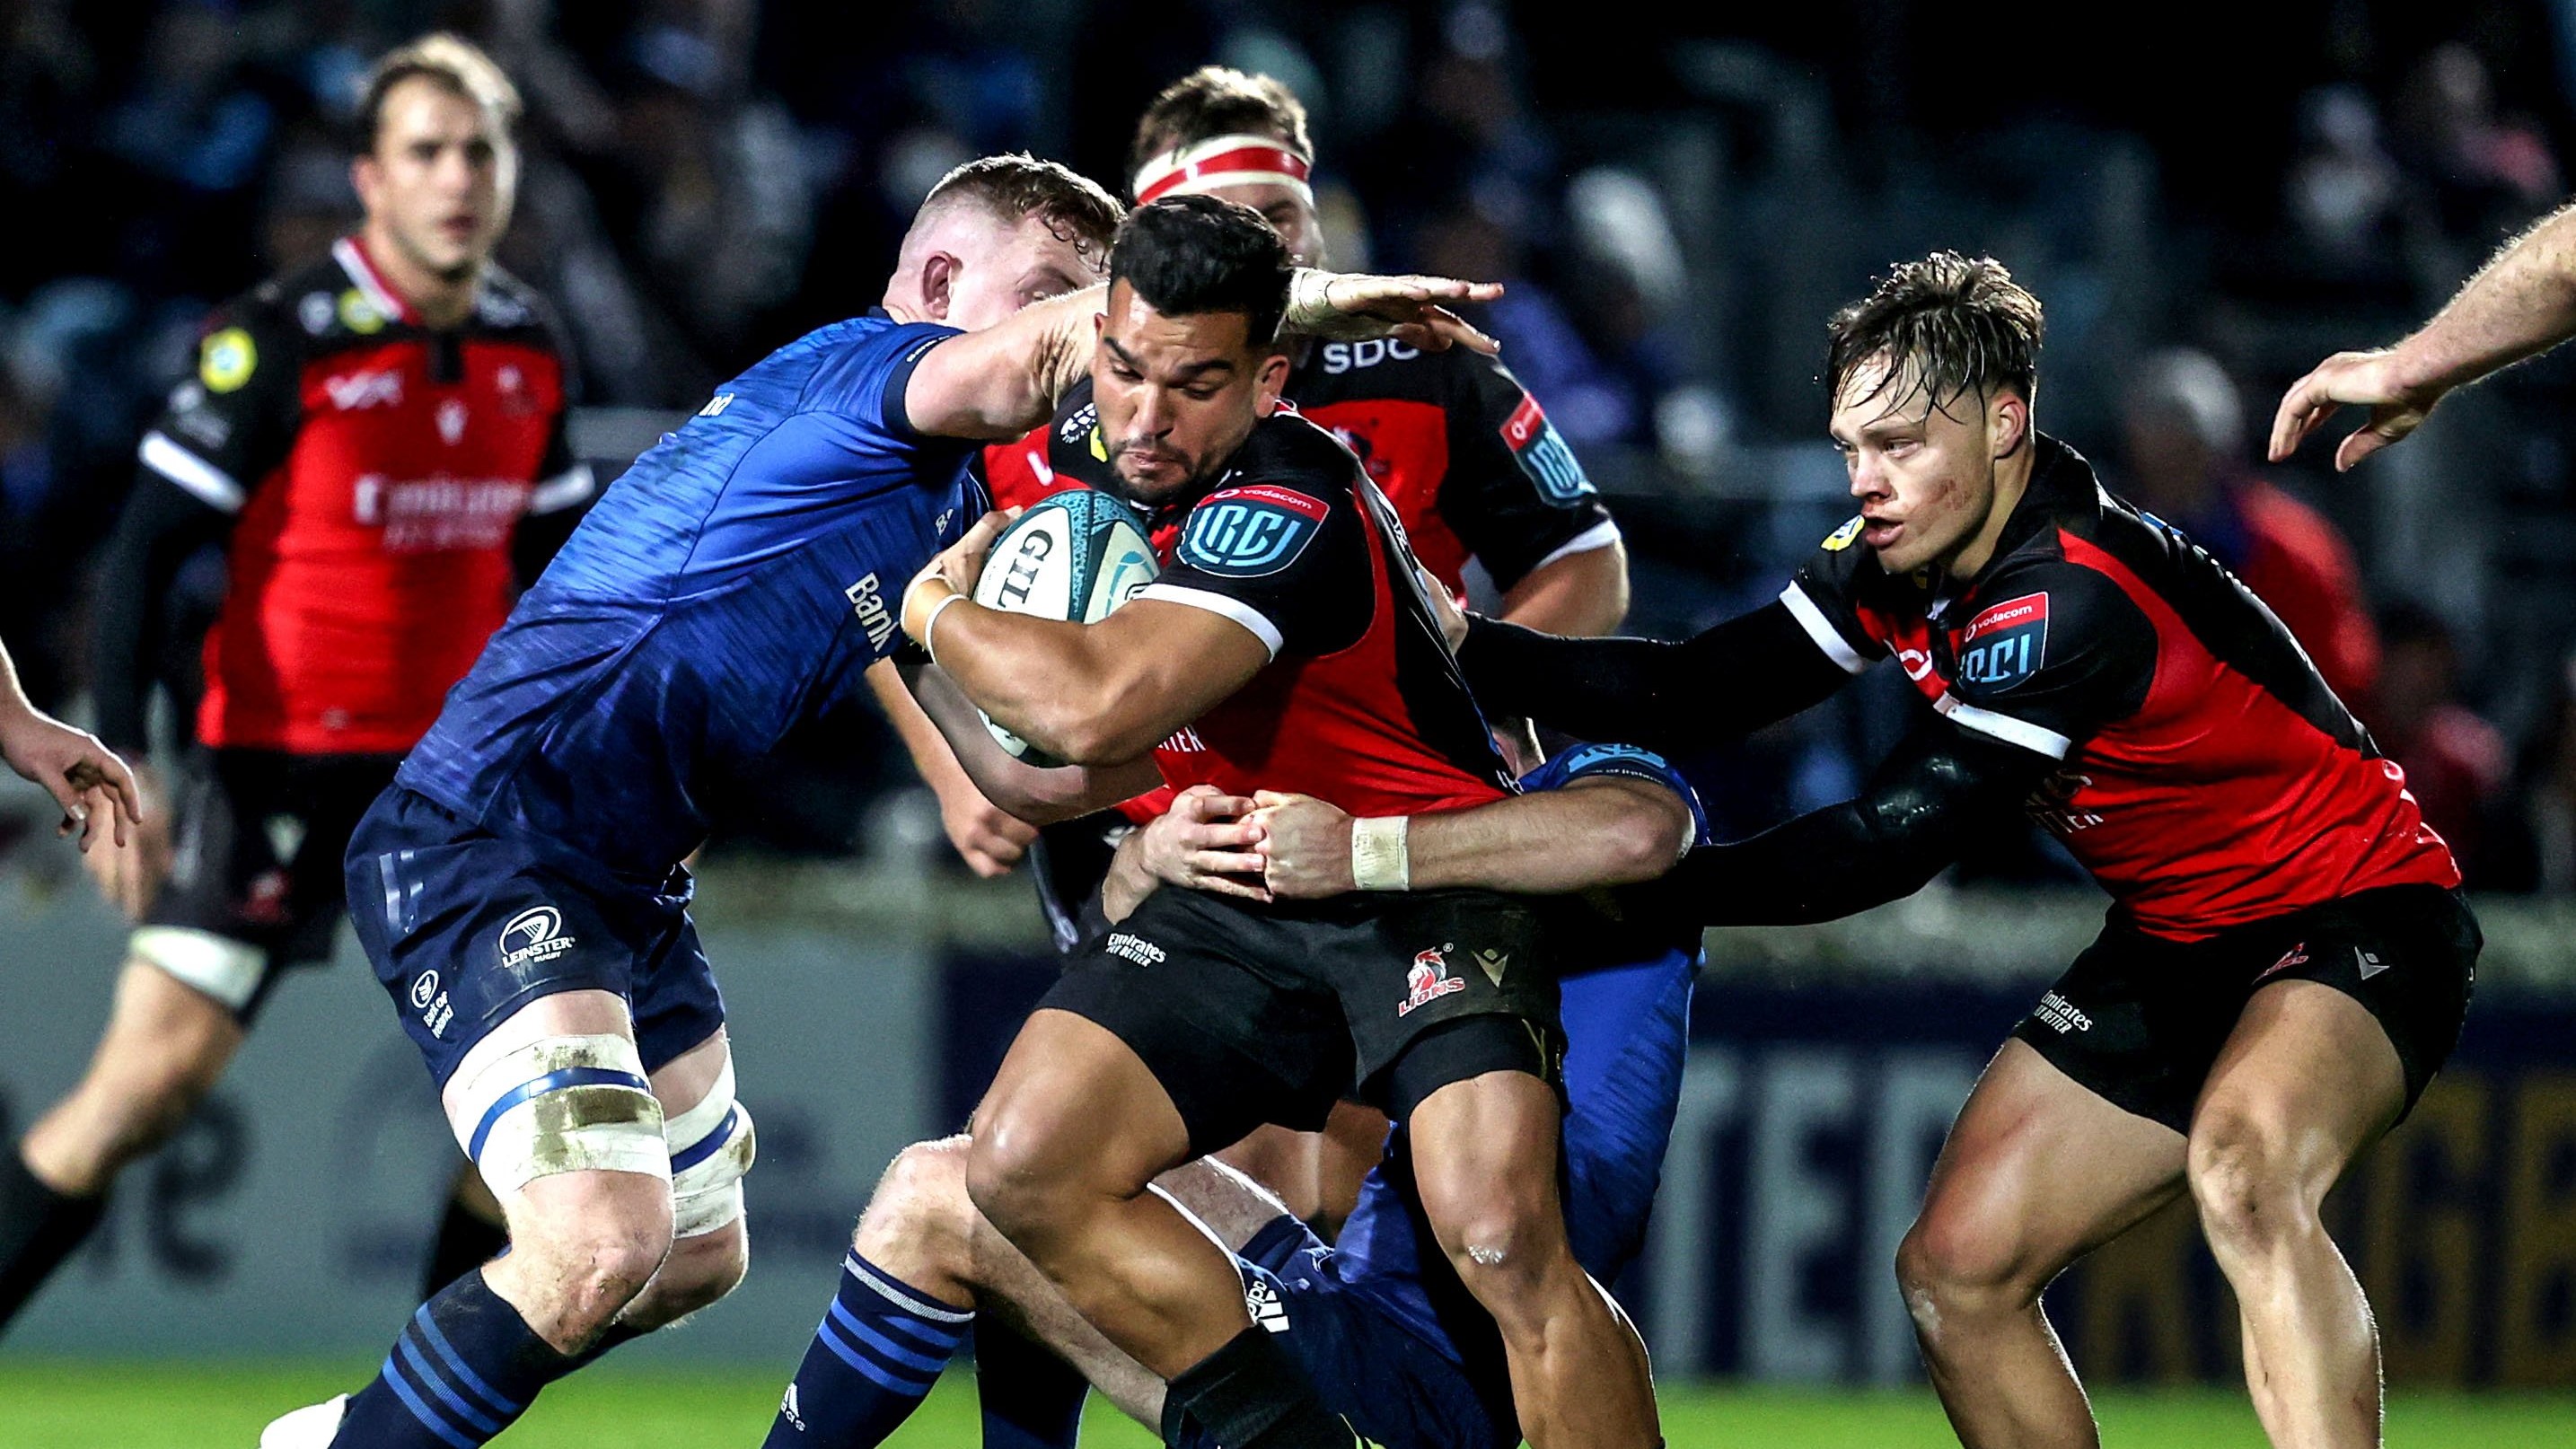 Mandatory Credit: Photo by Dan Sheridan/INPHO/Shutterstock/BackpagePix (12823240y) Leinster vs Emirates Lions. Lions' Stean Pienaar with Dan Leavy of Leinster United Rugby Championship, RDS, Dublin - 25 Feb 2022